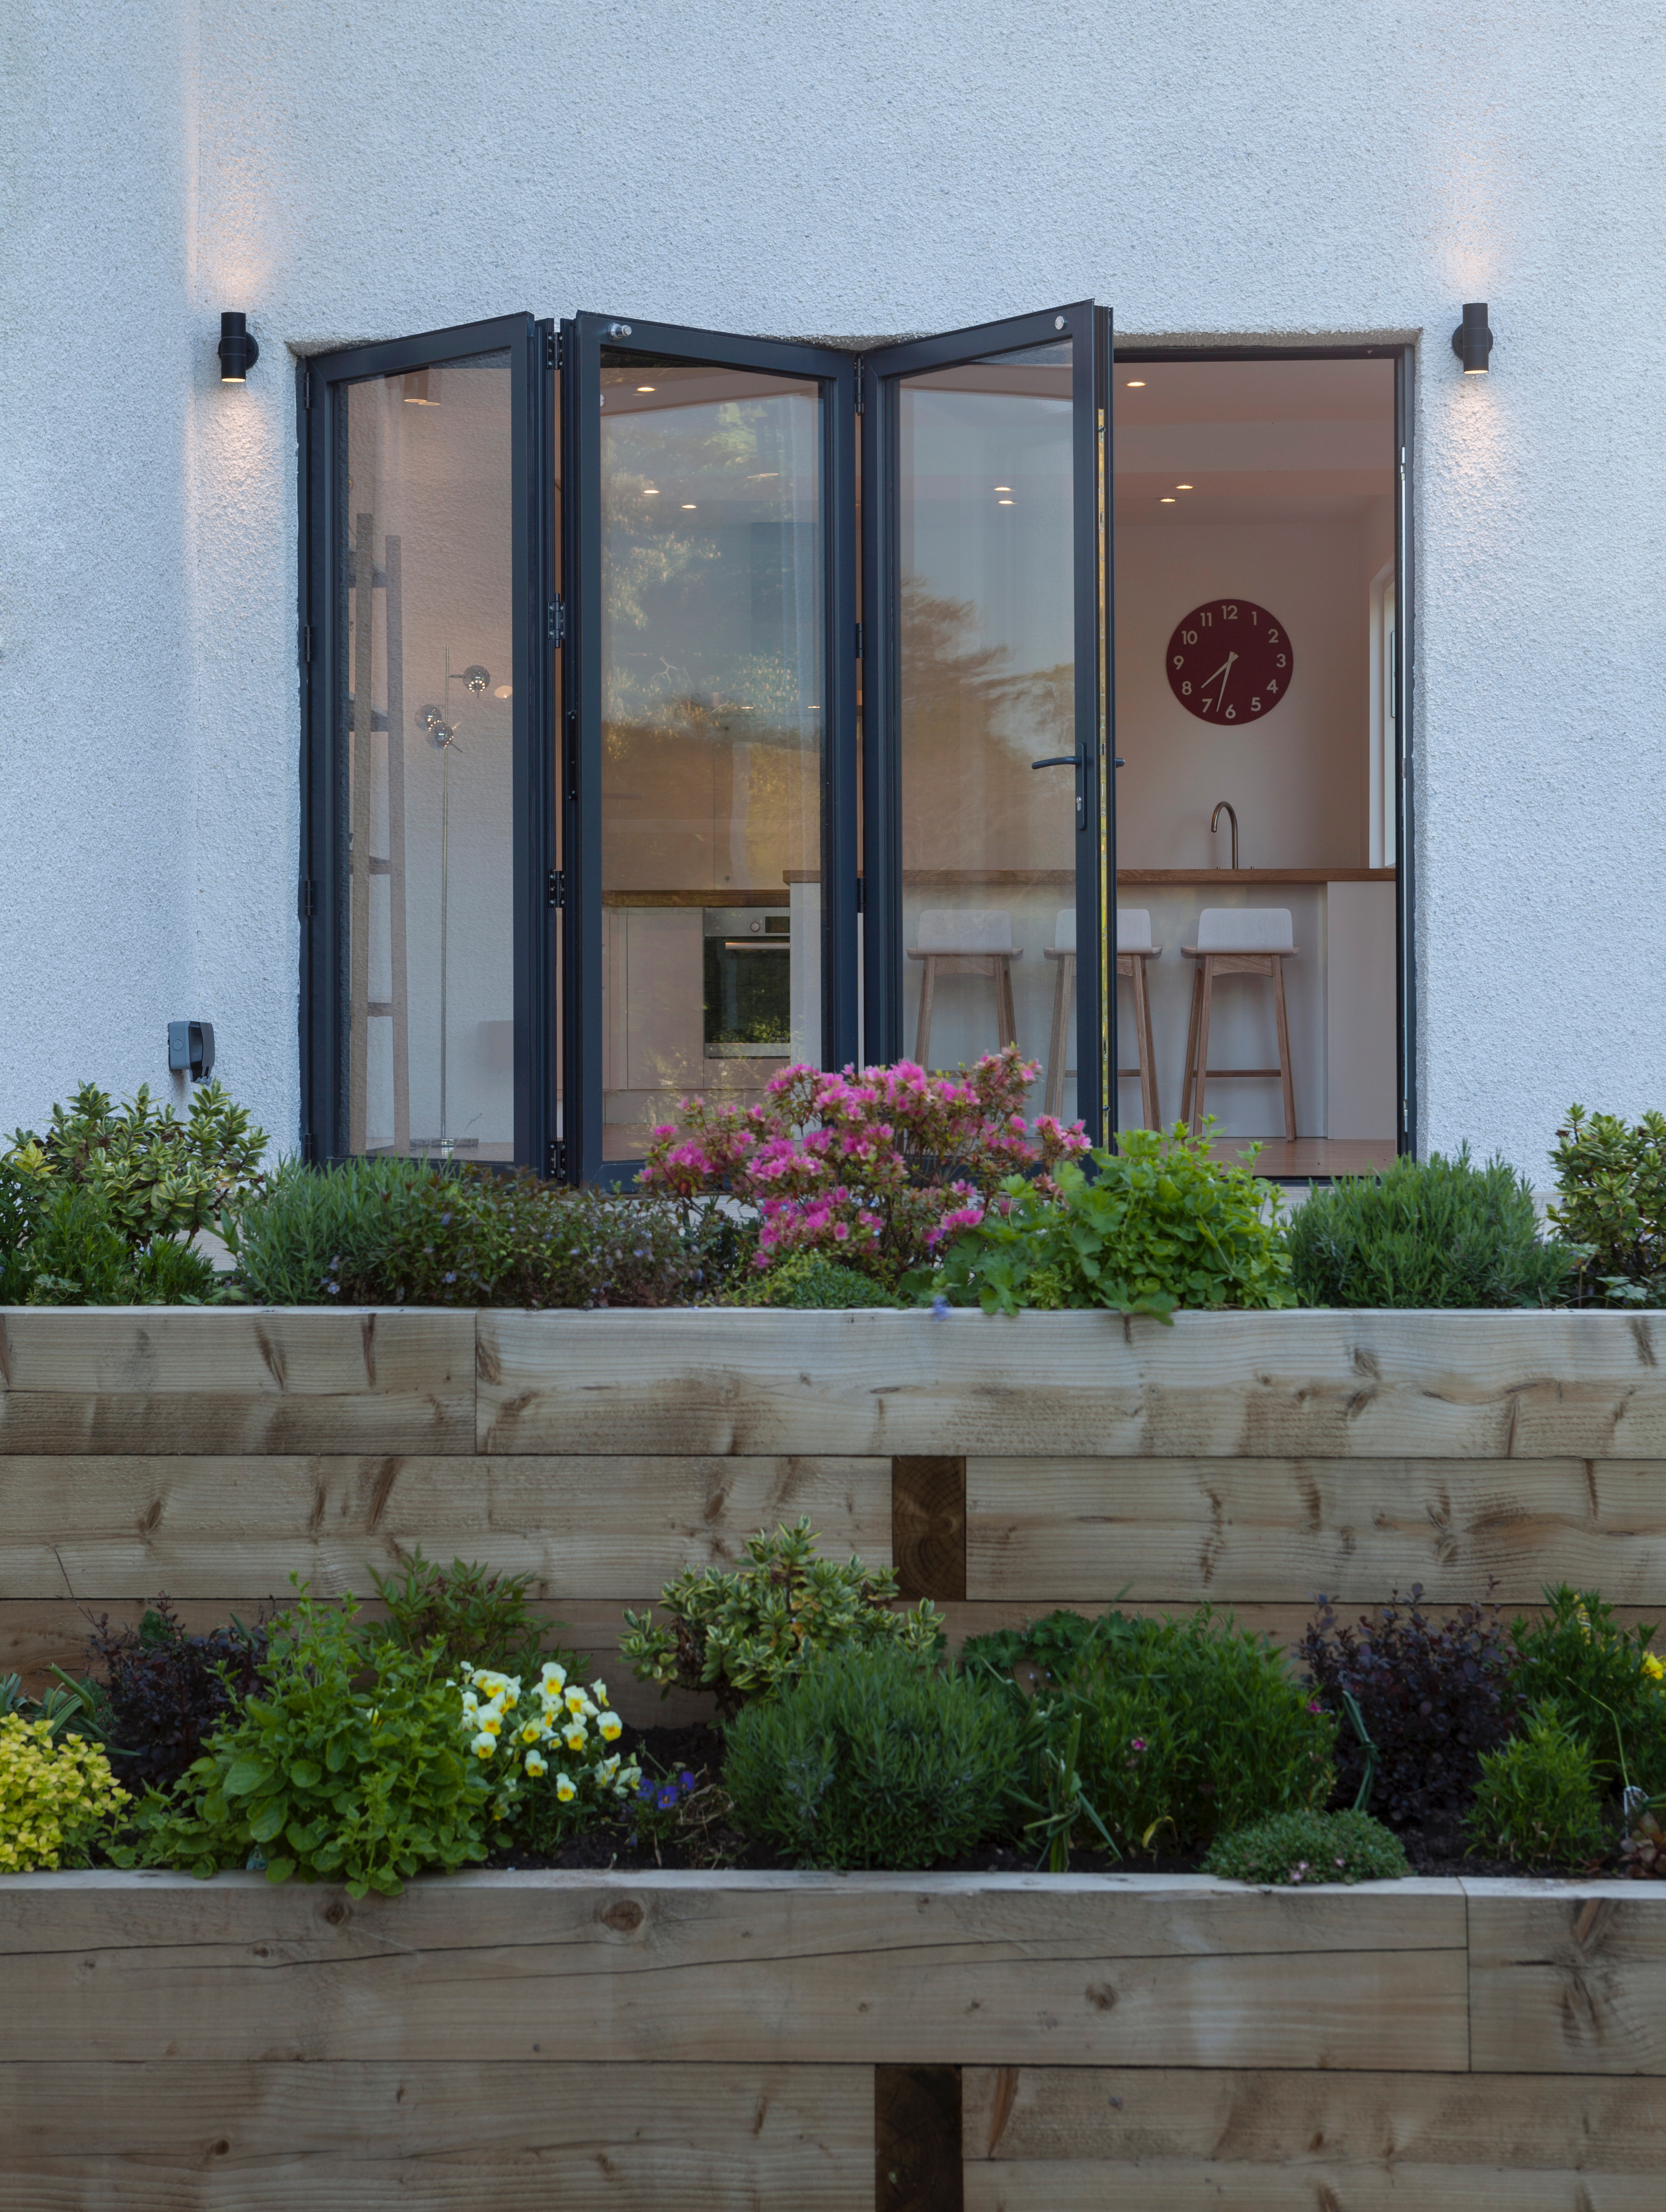 stepped flower beds leading to raised terrace with folding door access